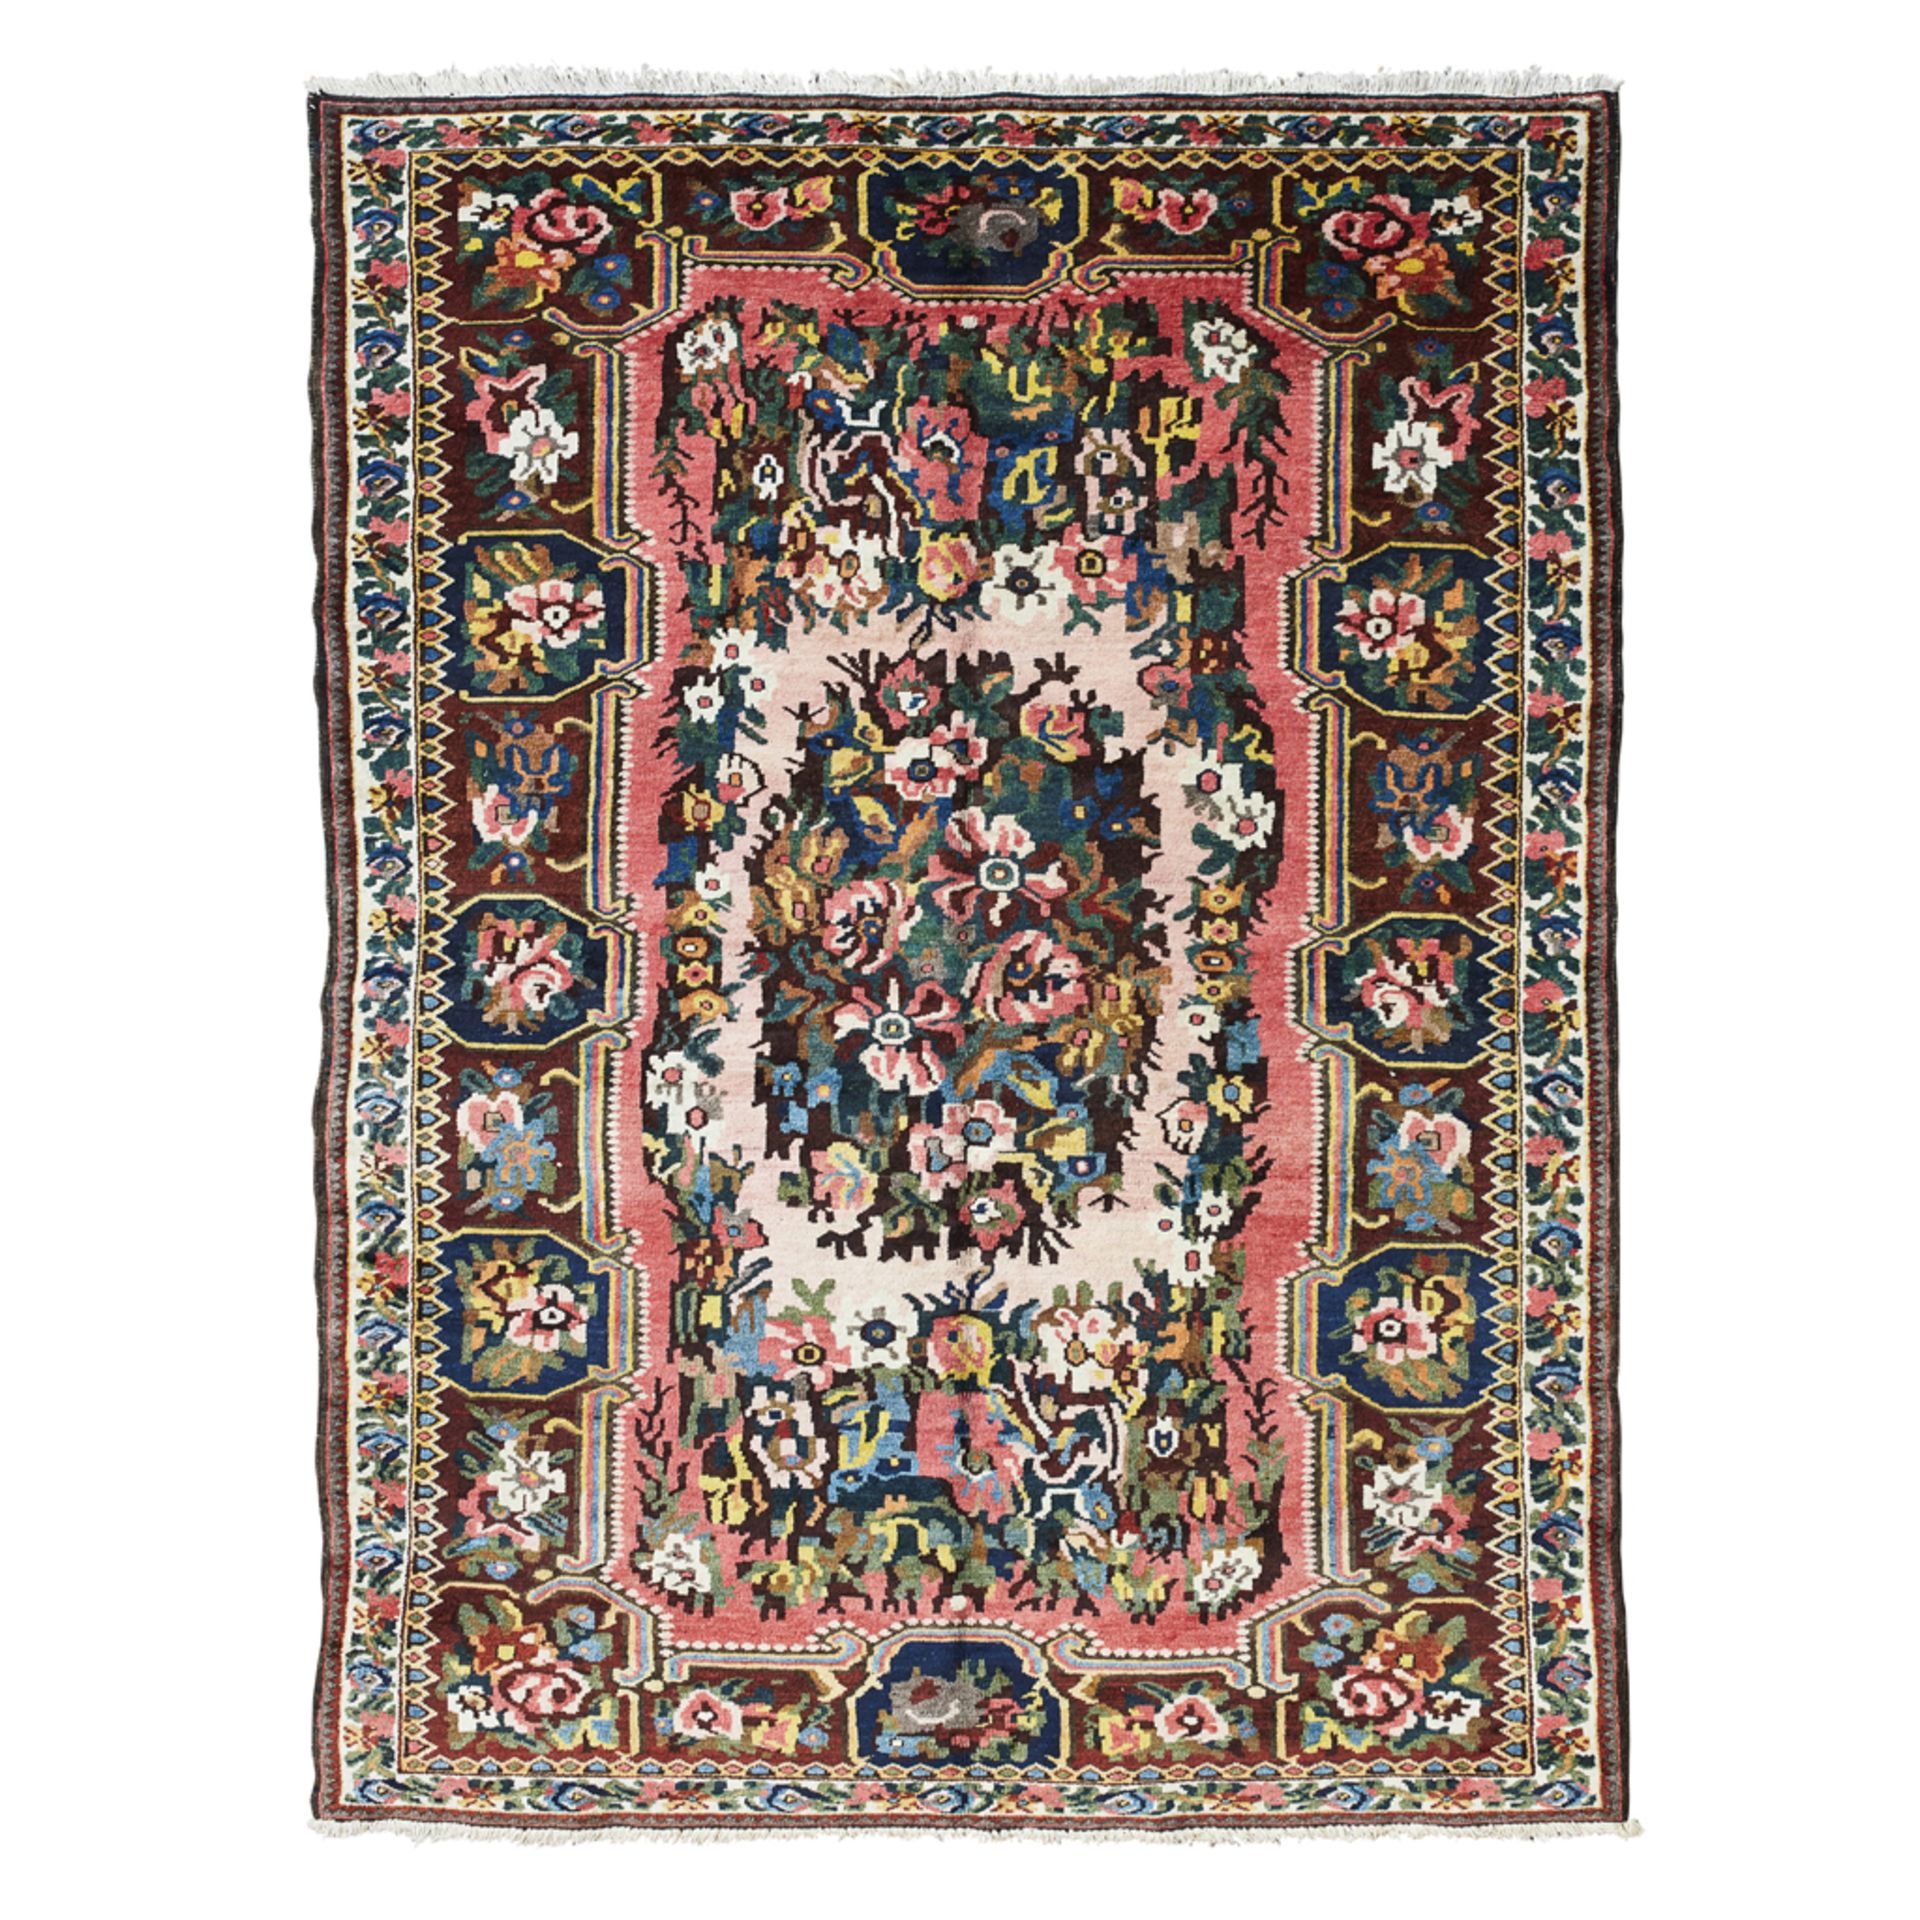 BAKHTIARI RUG WEST PERSIA, 20TH CENTURY the pink field with floral medallion, within brown floral